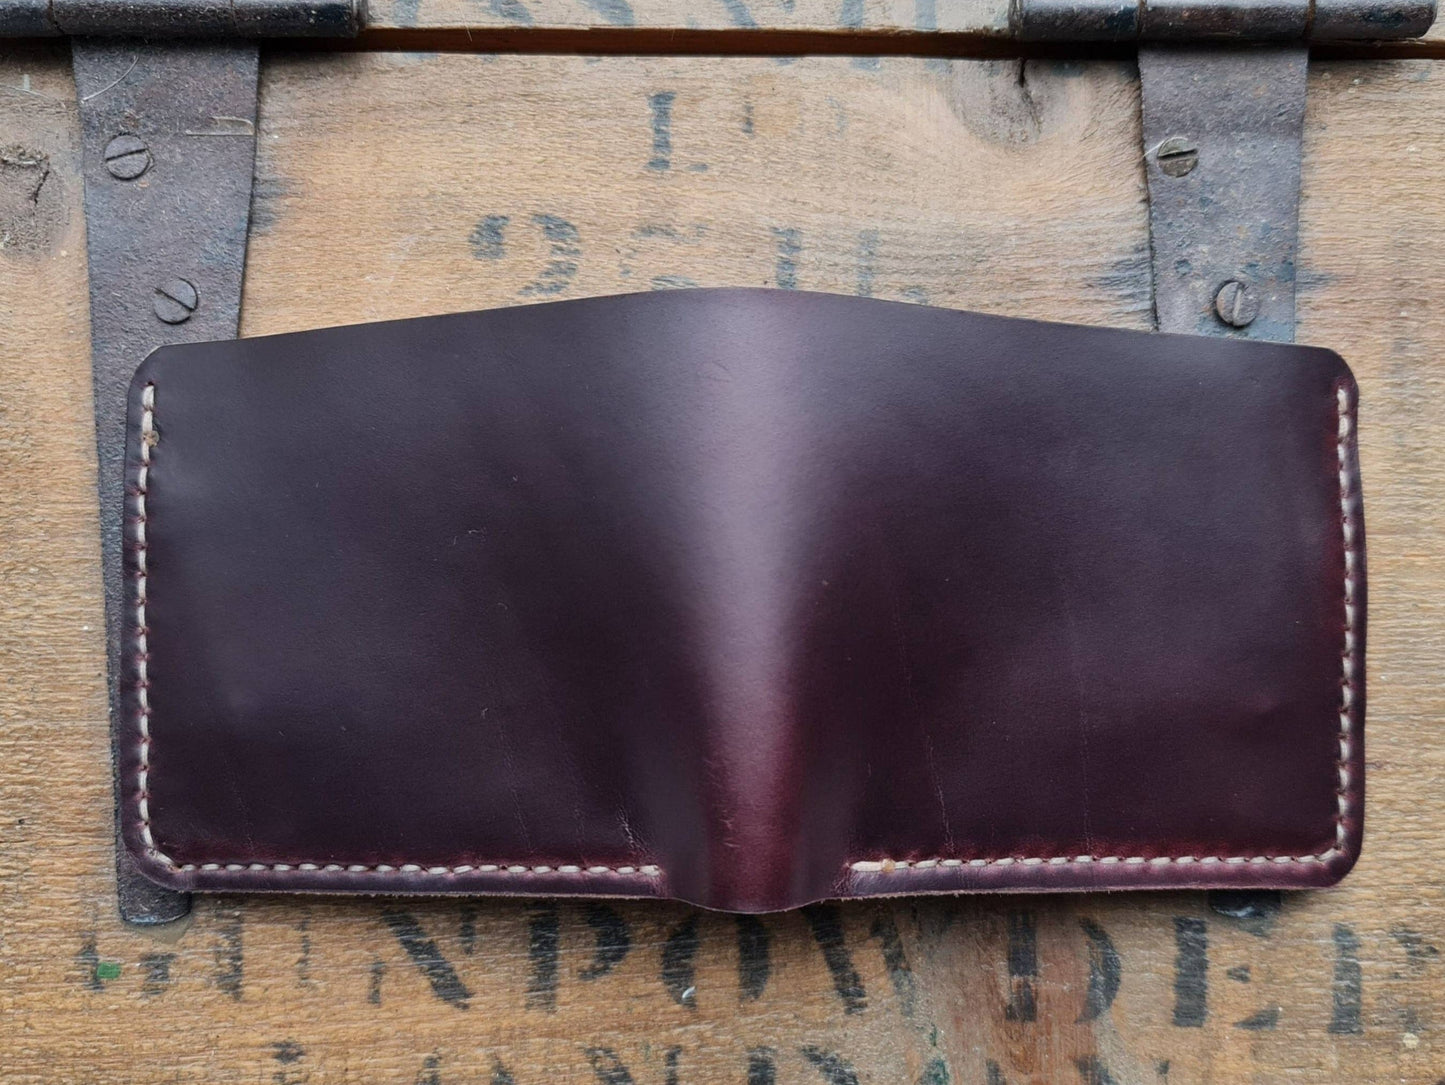 No. 2 Frontiersman Custom Leather Wallets, Horween Burgundy Chromexcel Leather, Back Open